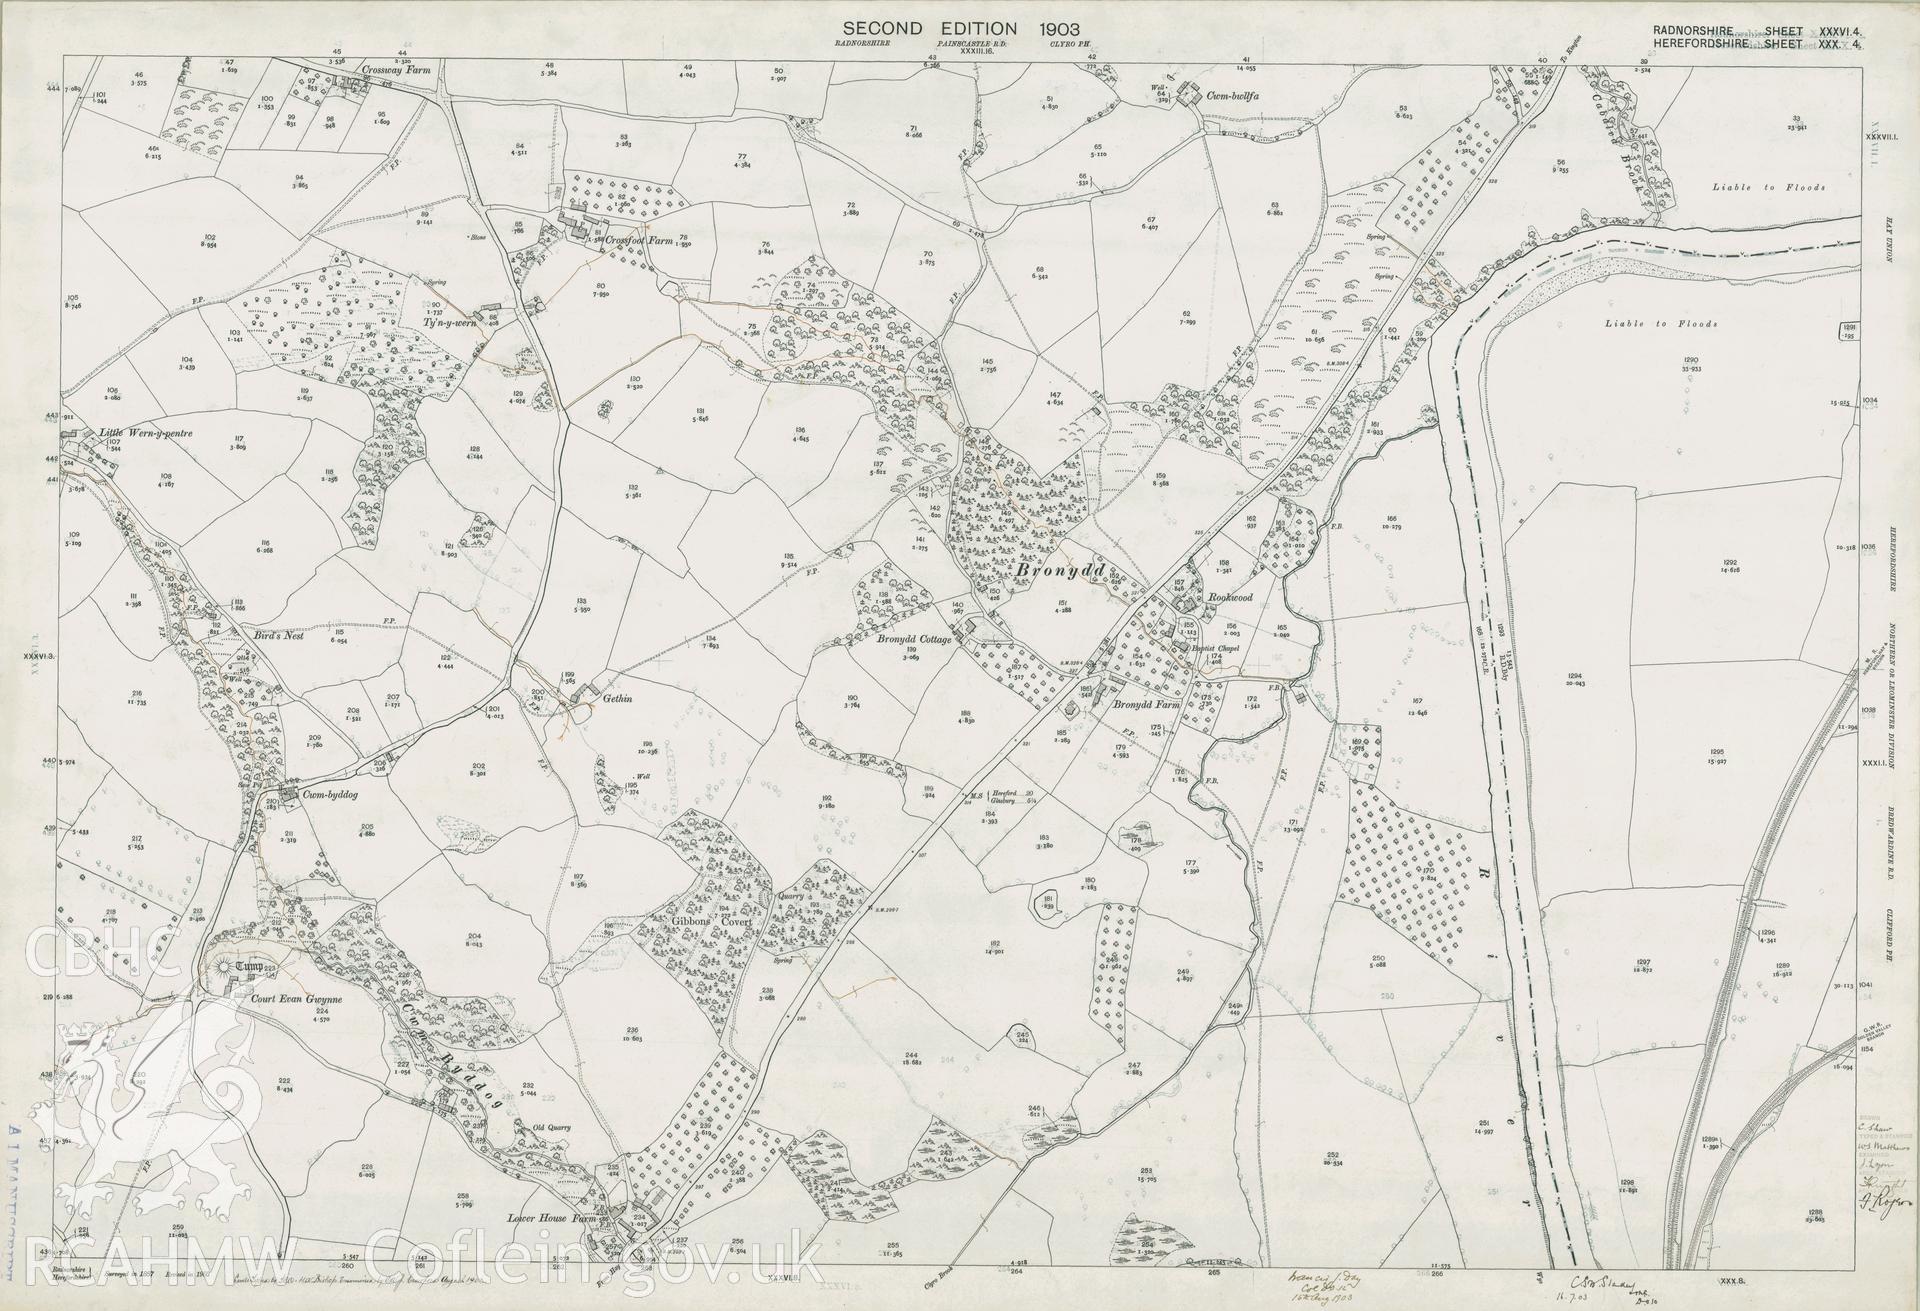 Digitized copy of Ordnance Survey 25 inch map of Bronydd area. Second Edition 1903.